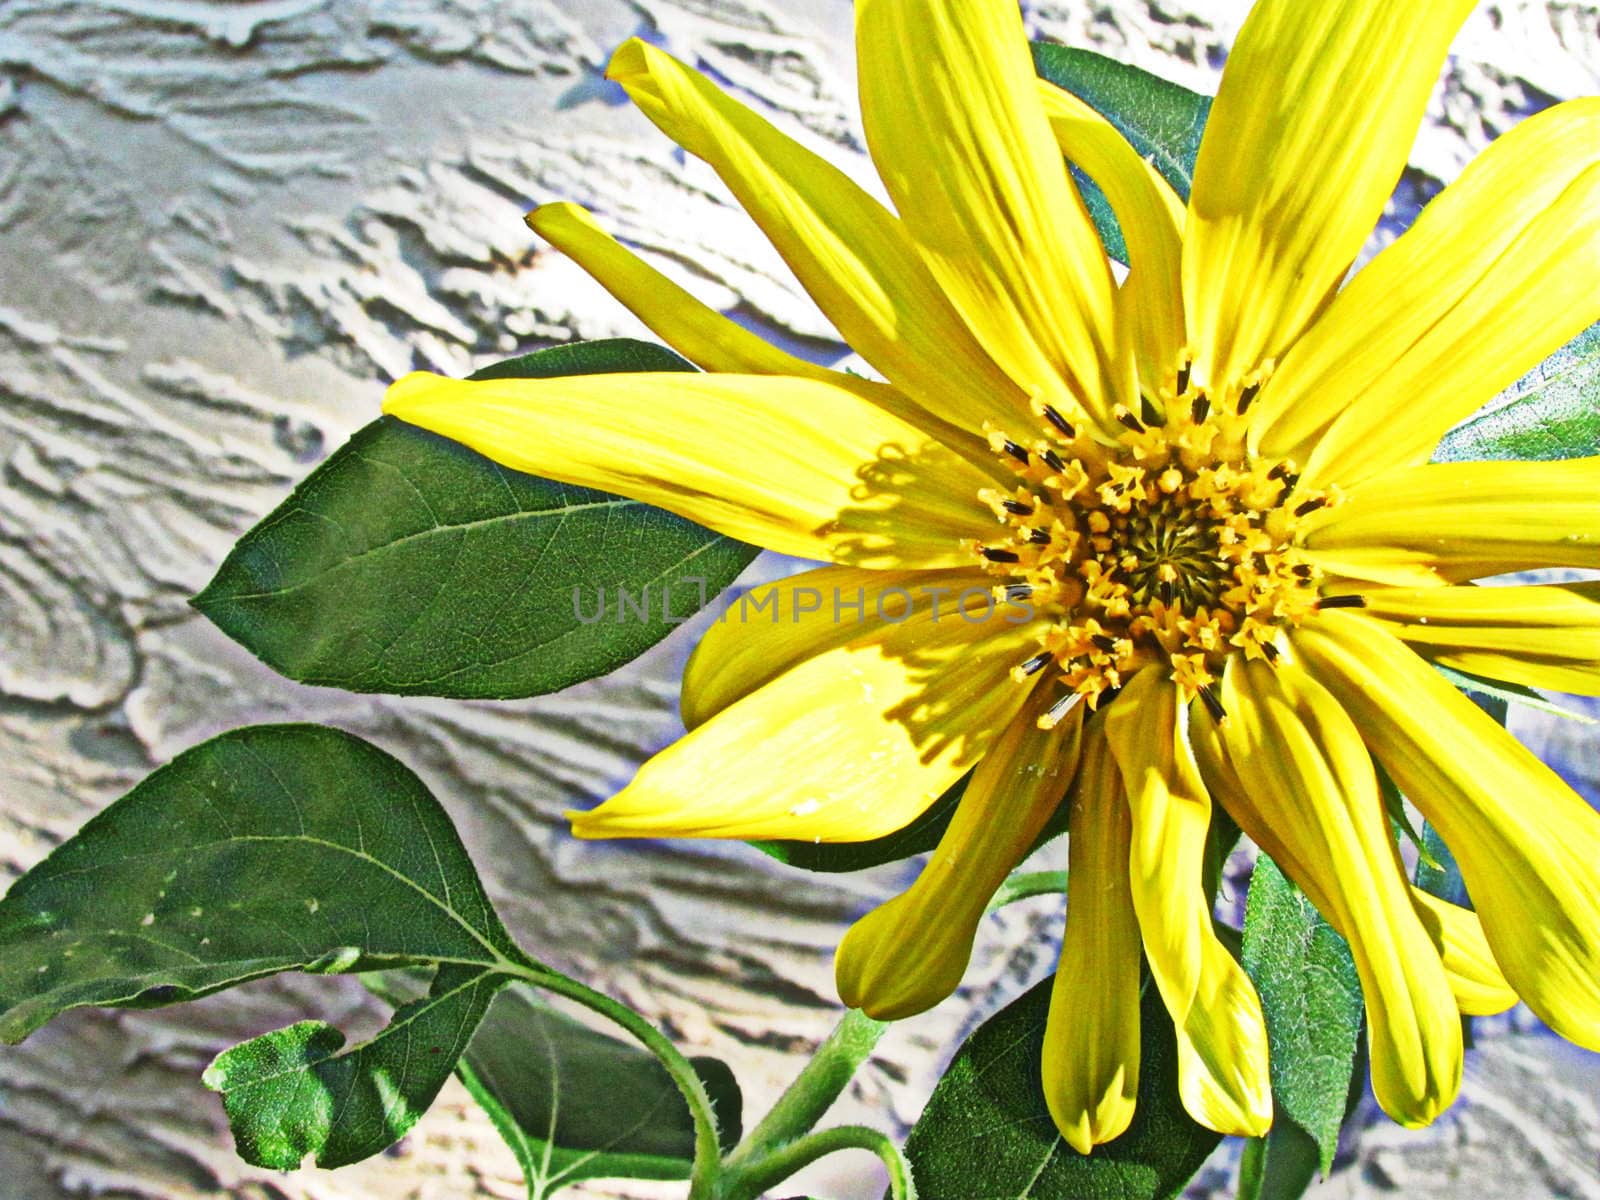 Immature Sunflower by cccaity63